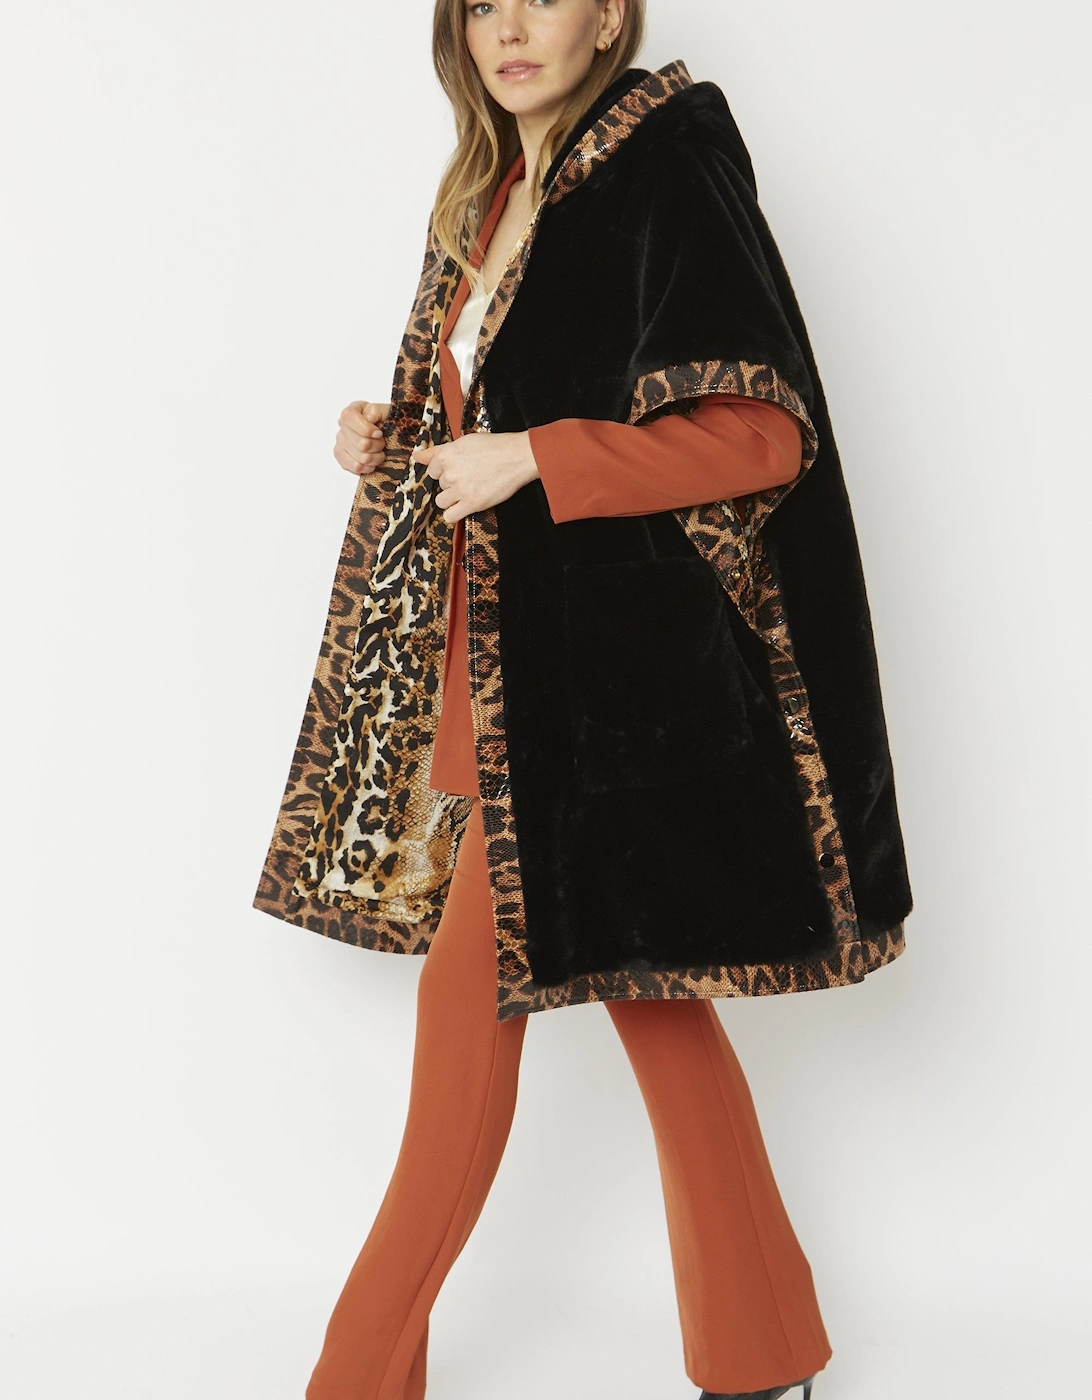 Black Hooded Faux Fur Cape with Animal Print Trim